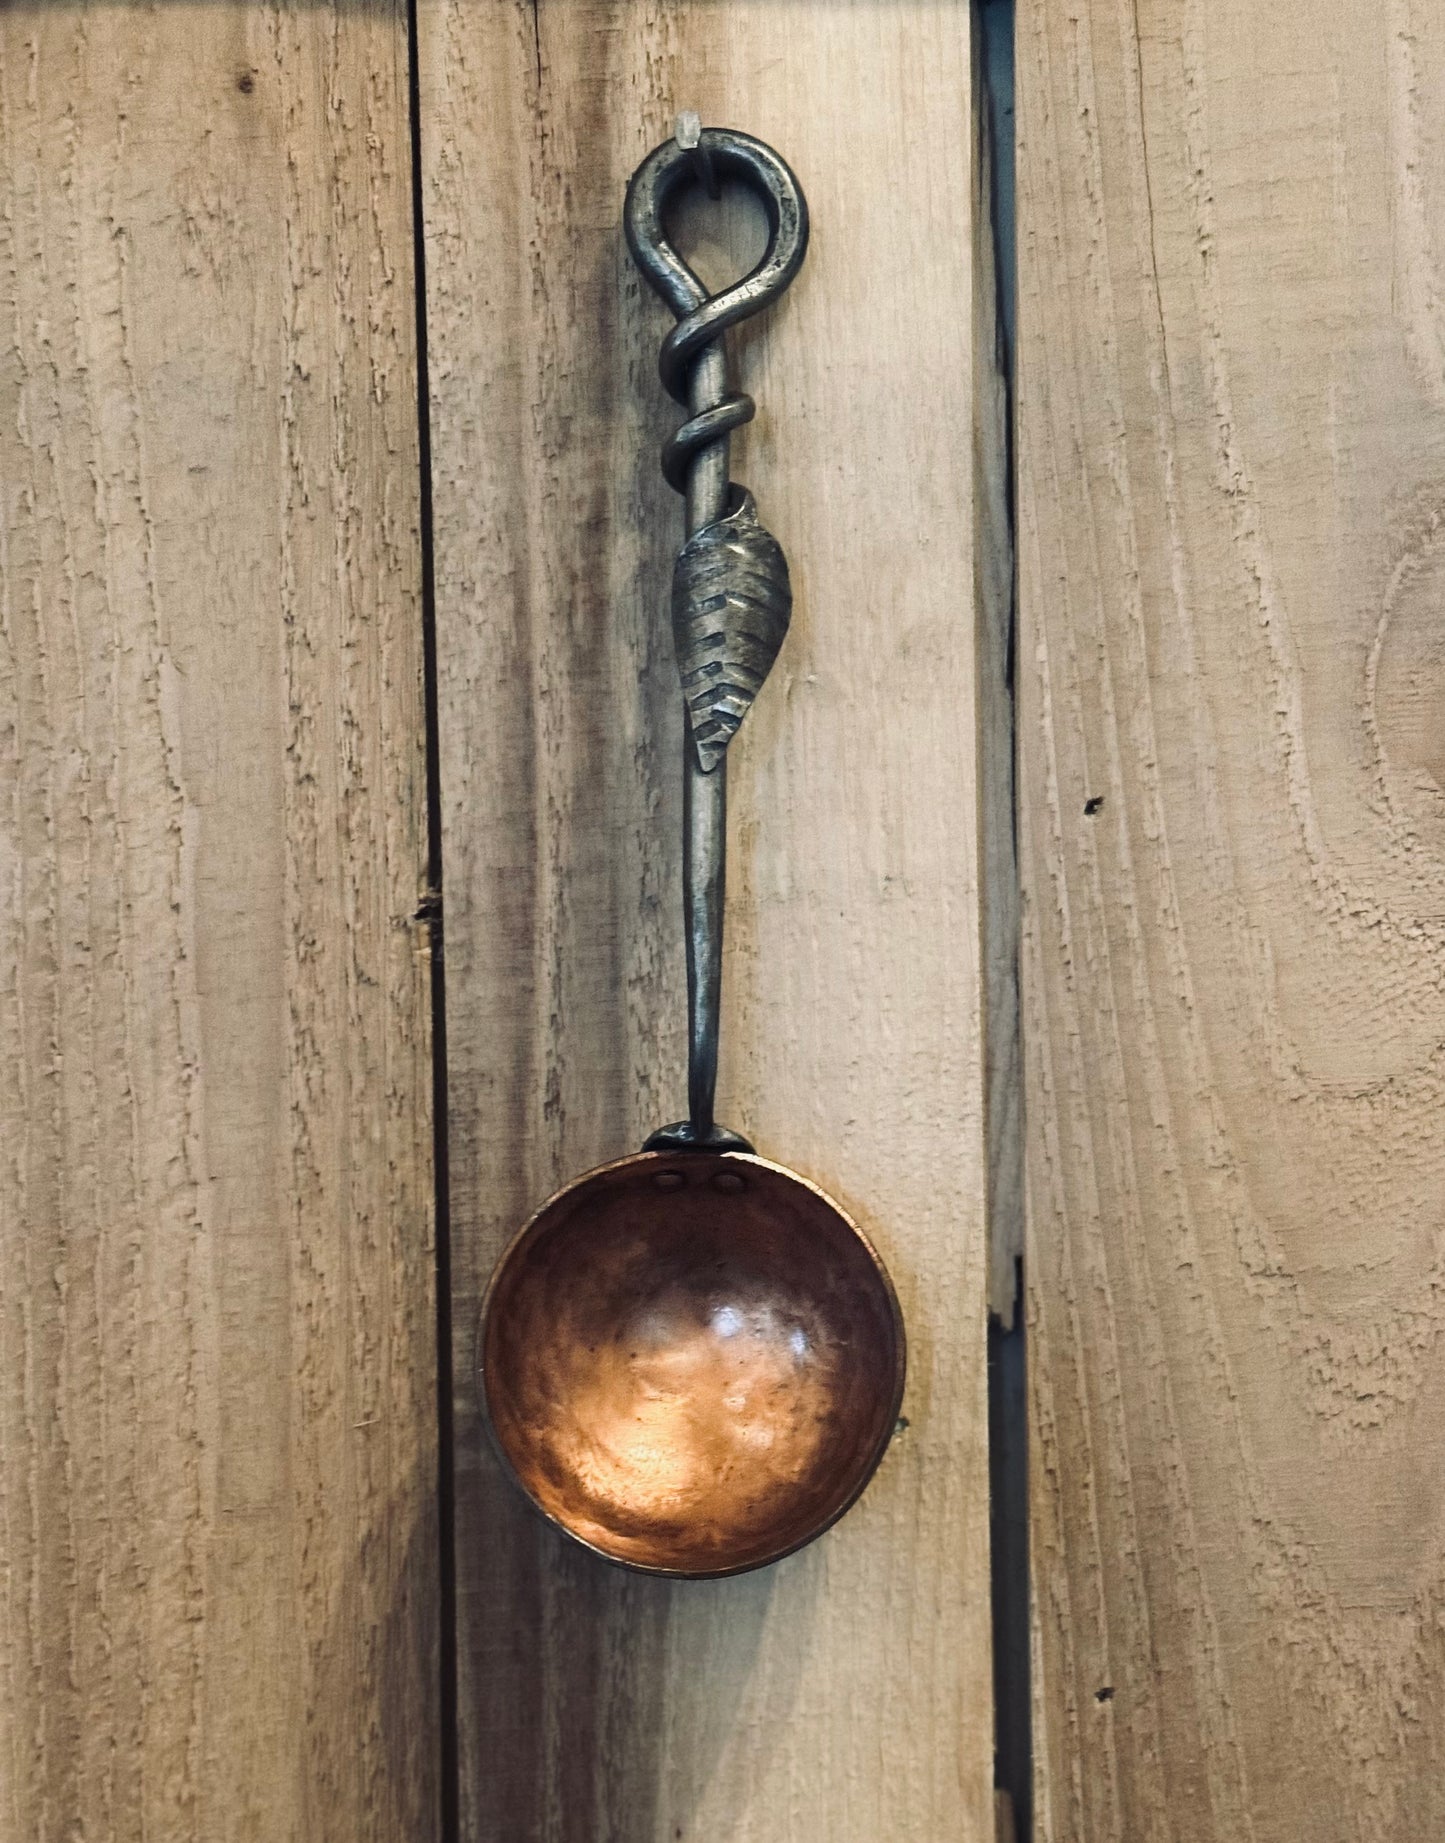 Hand Forged Solid Copper Egg Spoon With Steel Leaf Handle - Small